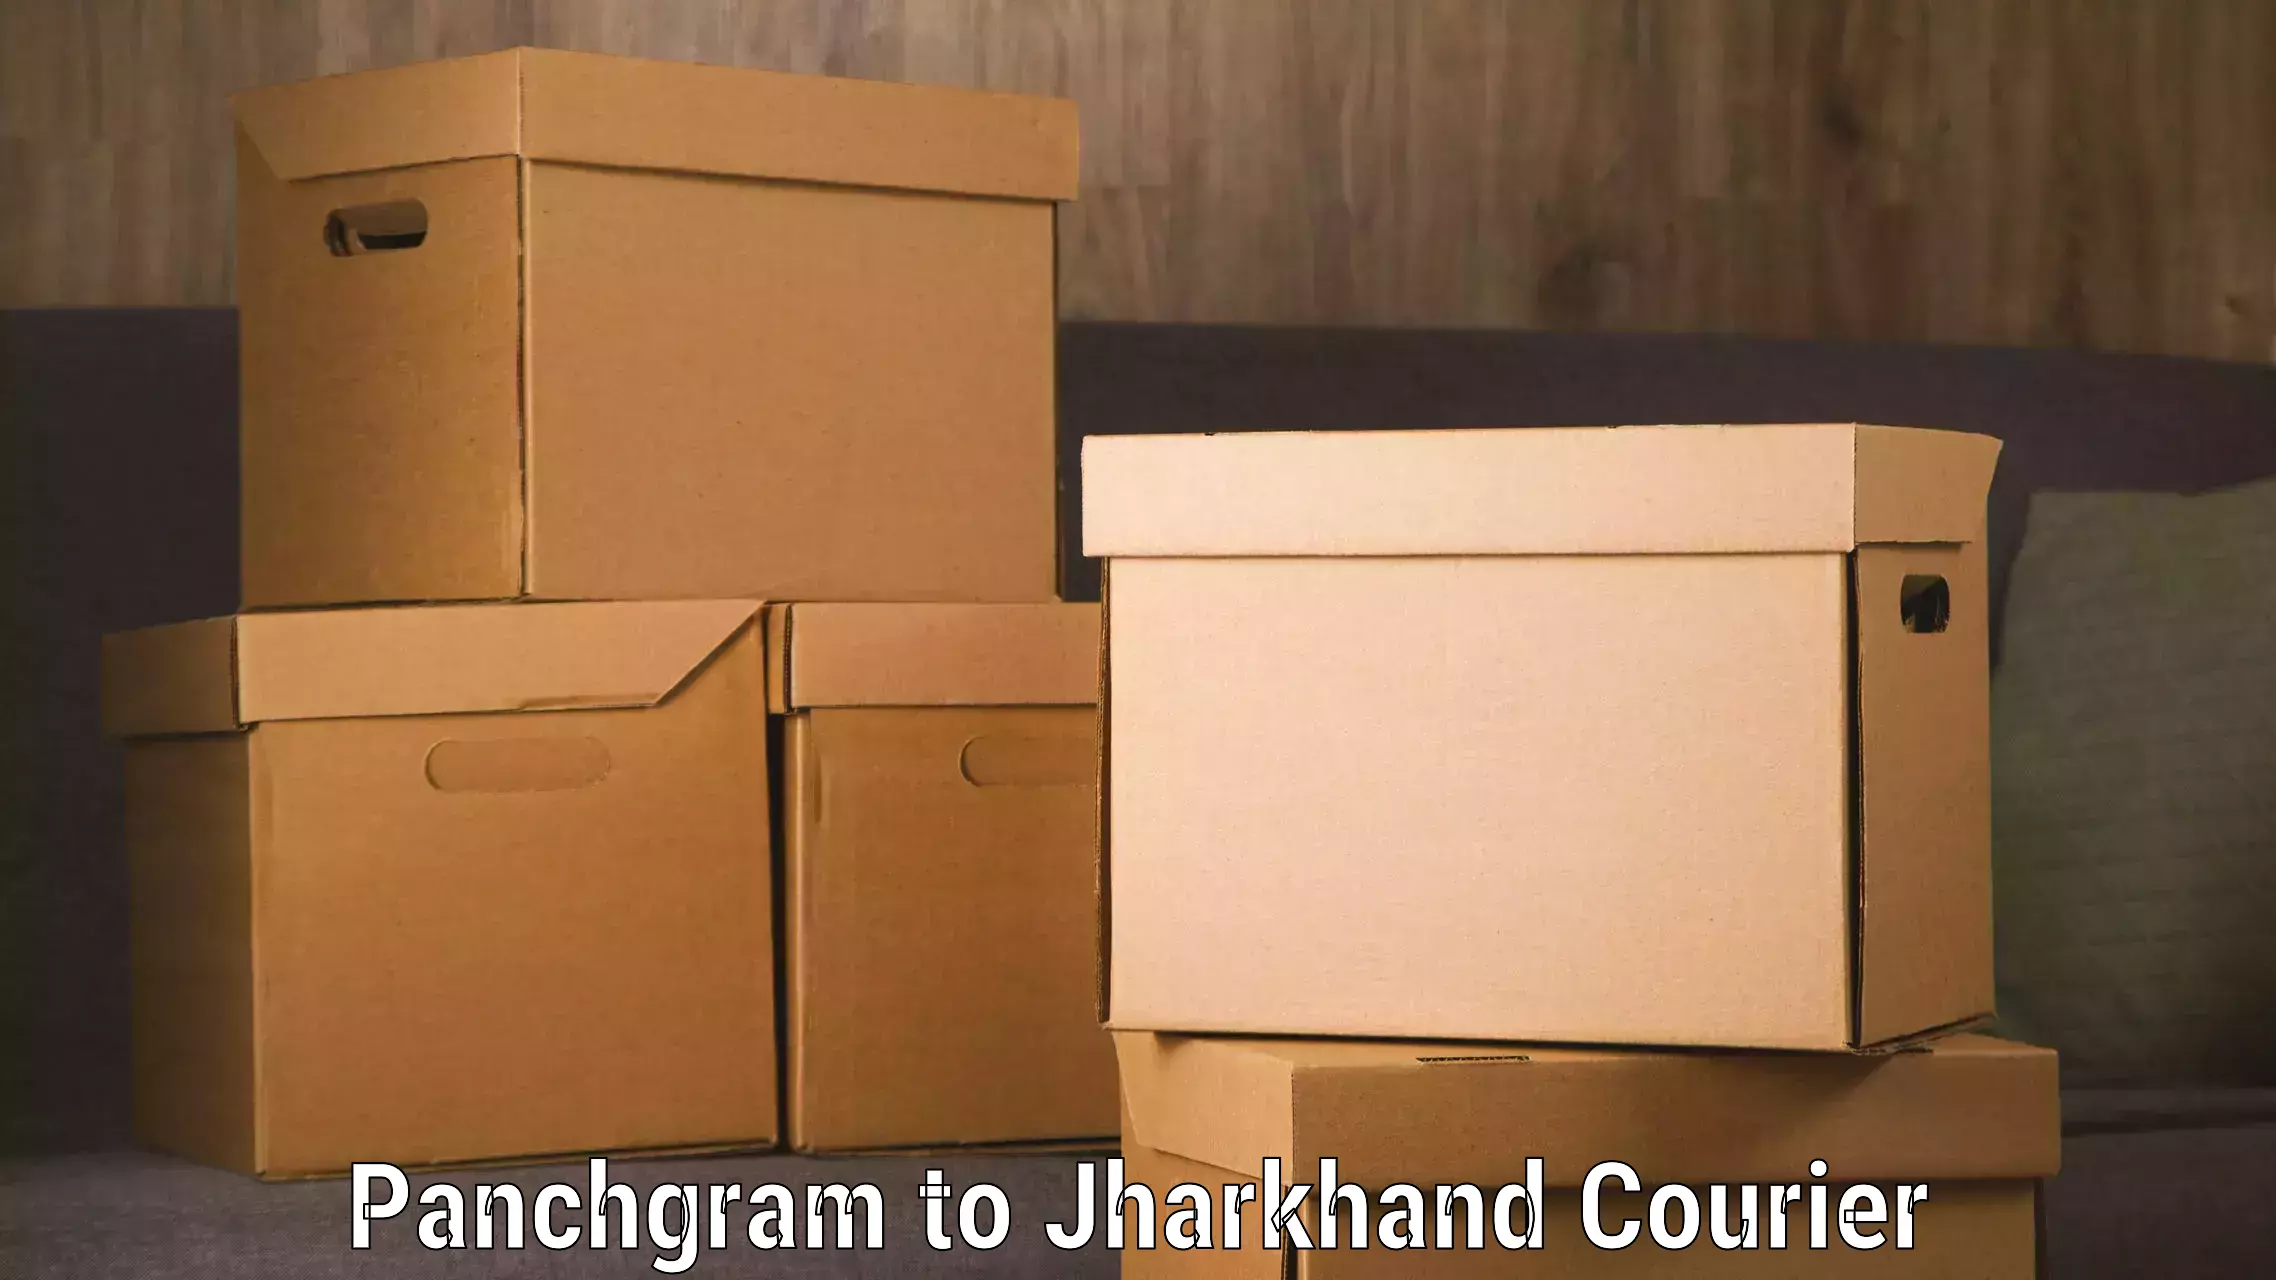 Luggage transport company Panchgram to Dhanbad